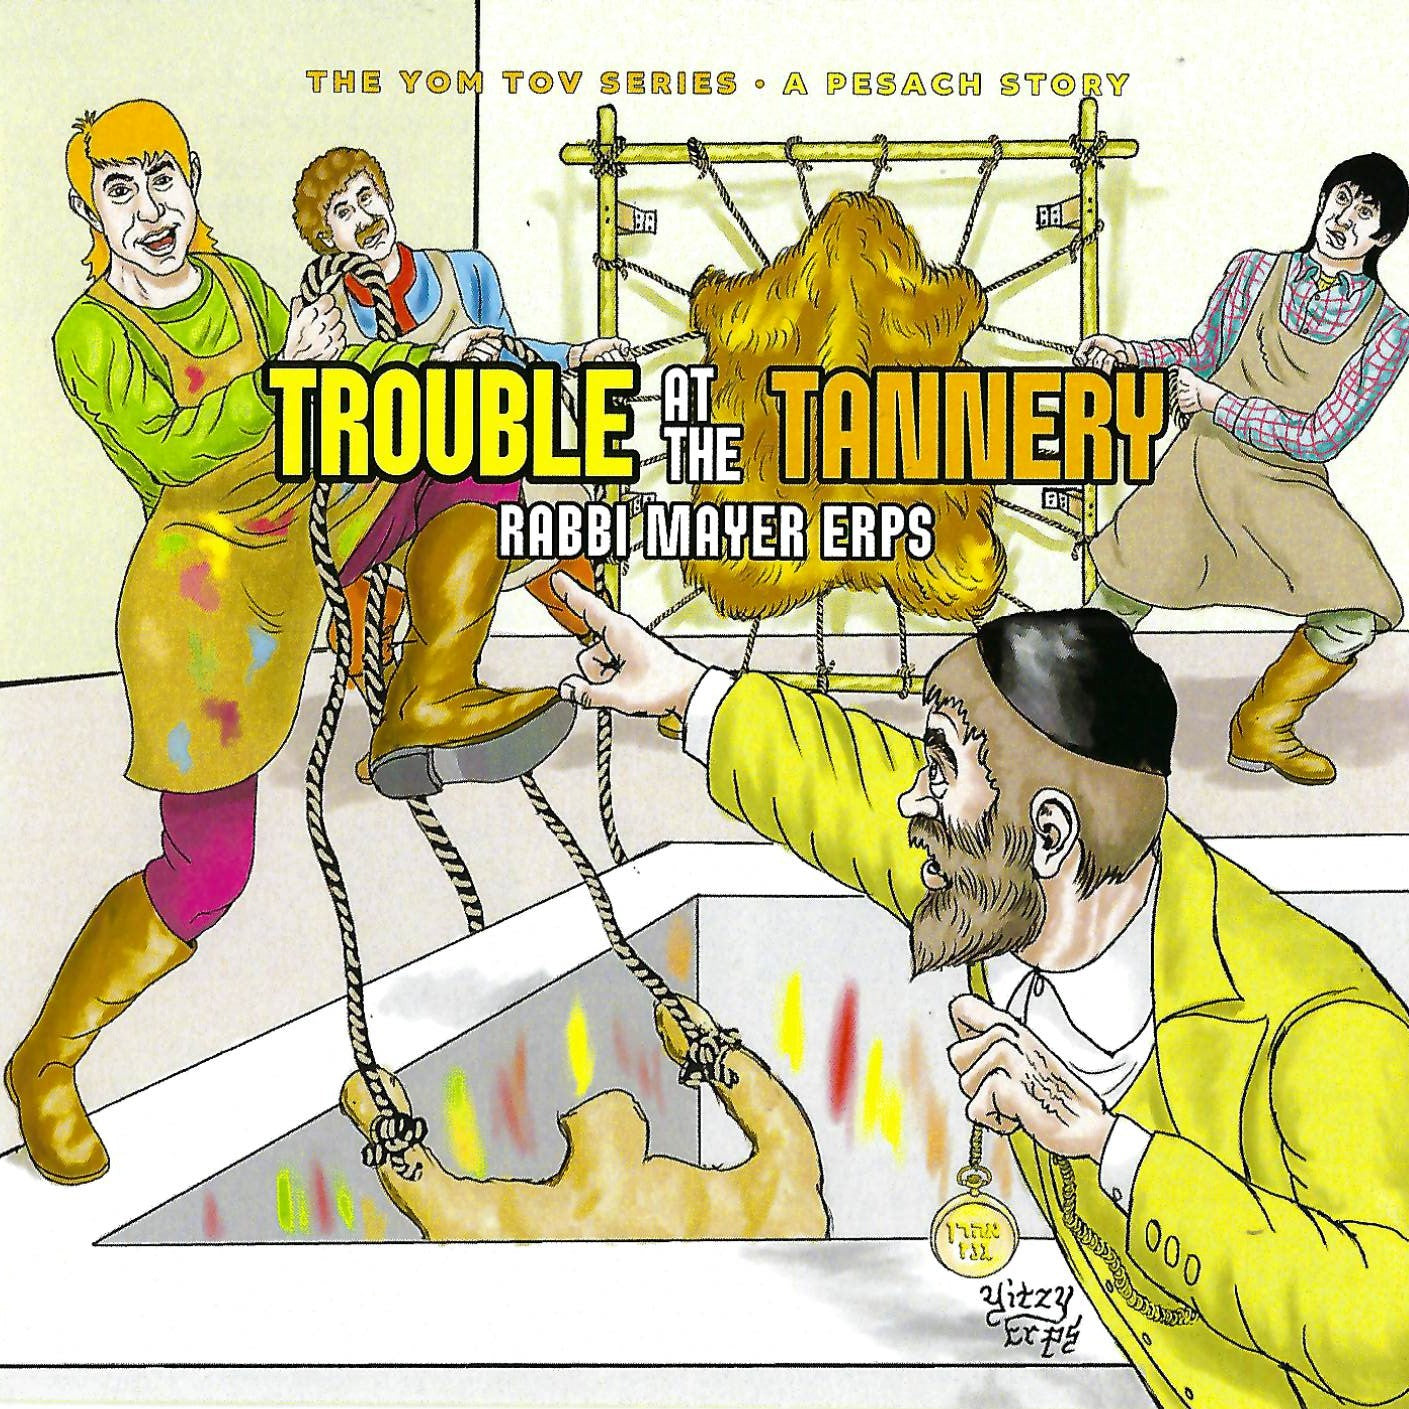 Rabbi Mayer Erps - Trouble At The Tannery